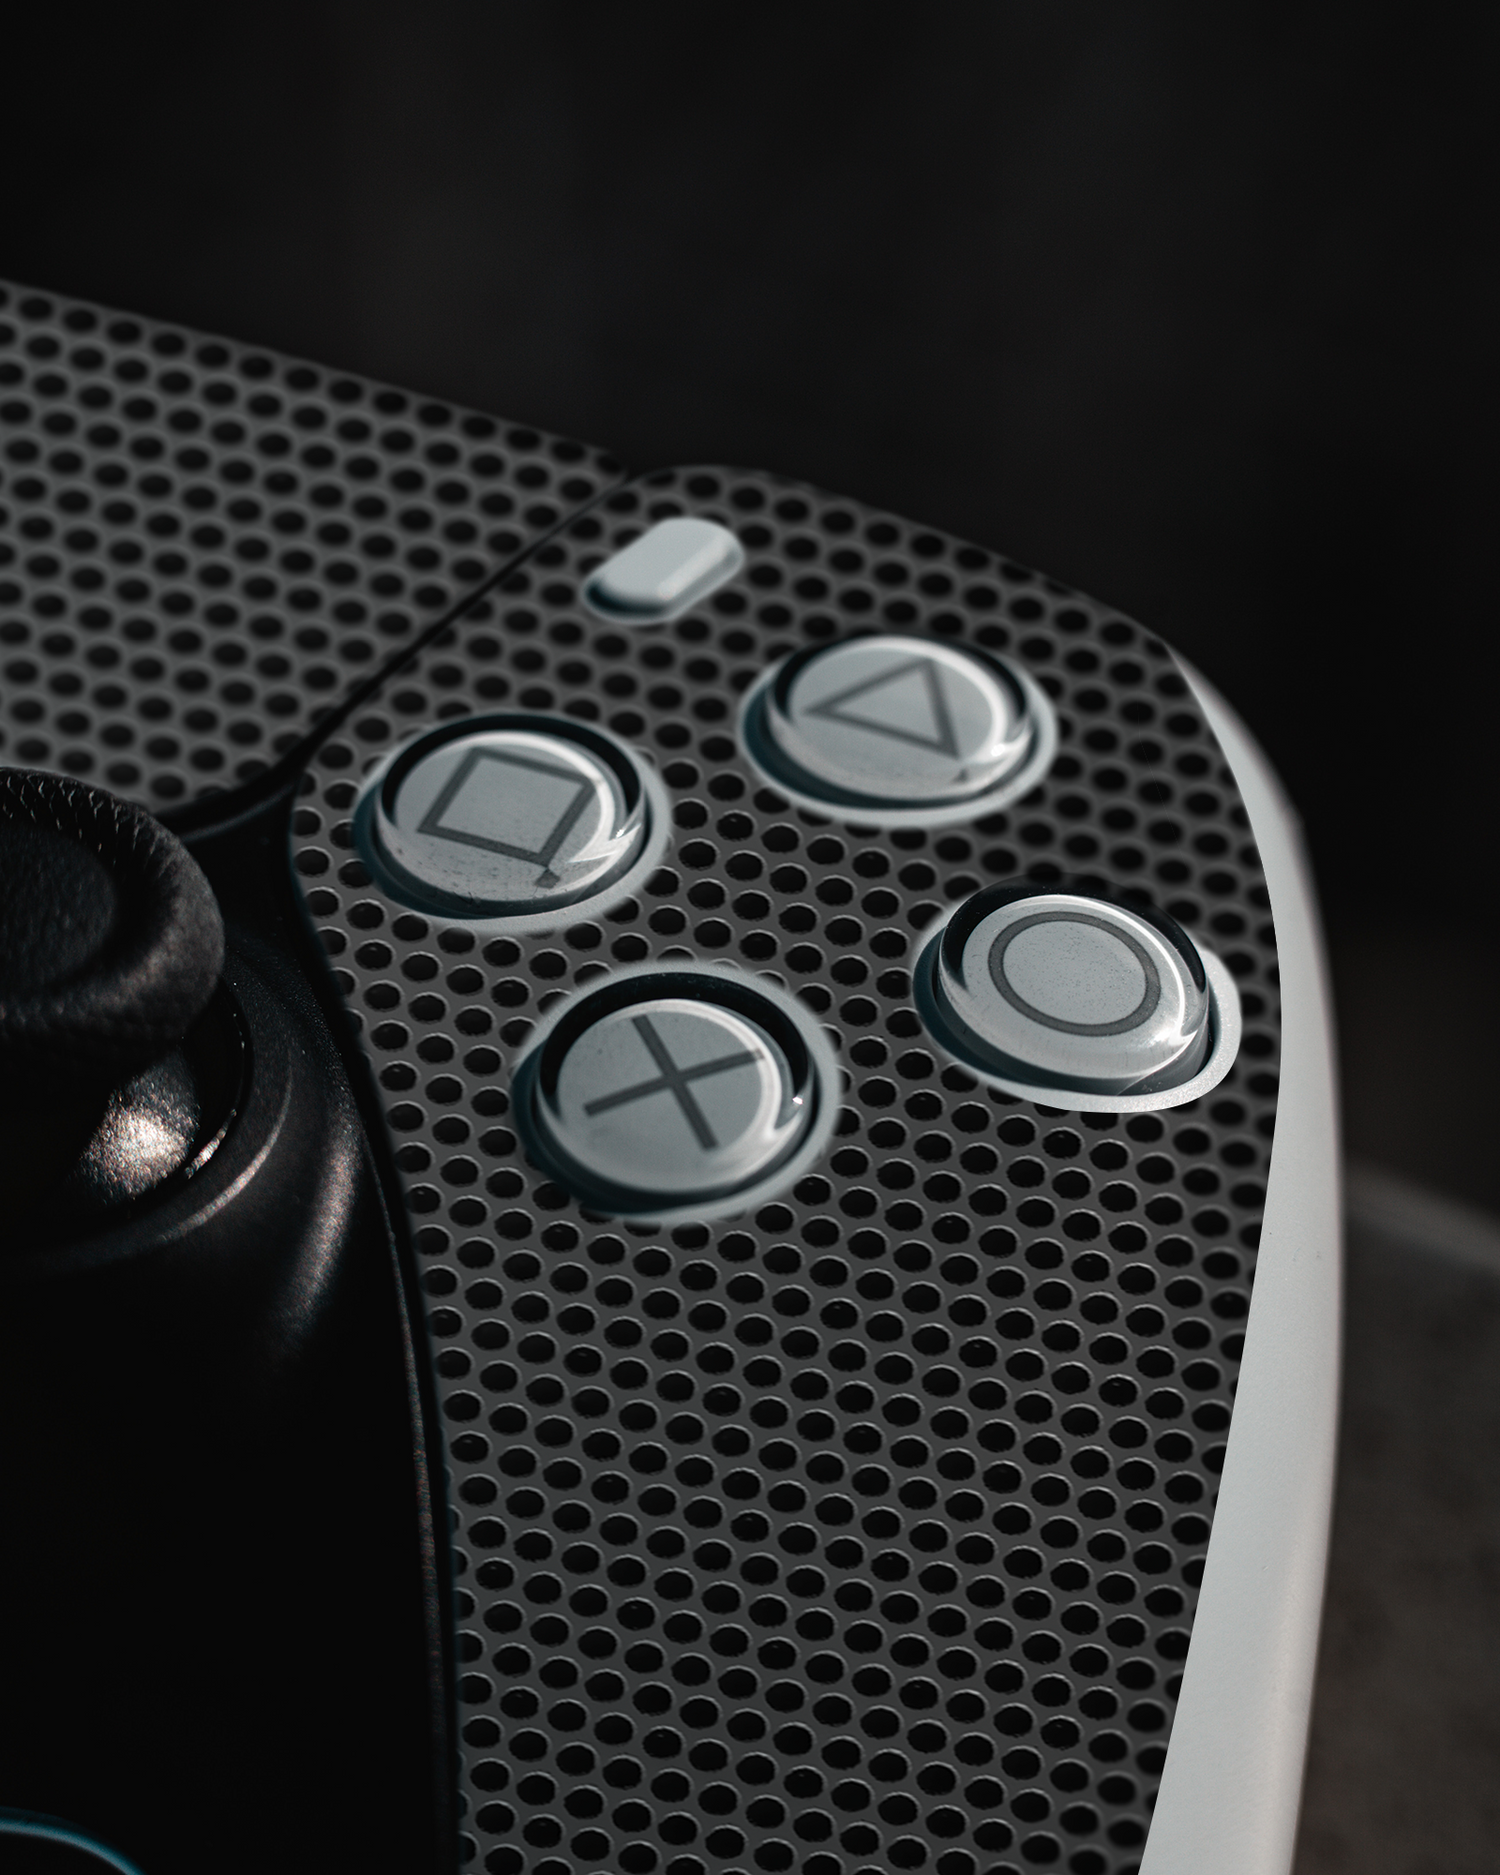 Carbon II Console Skin Sony PlayStation 5 DualSense Wireless Controller: Detail shot